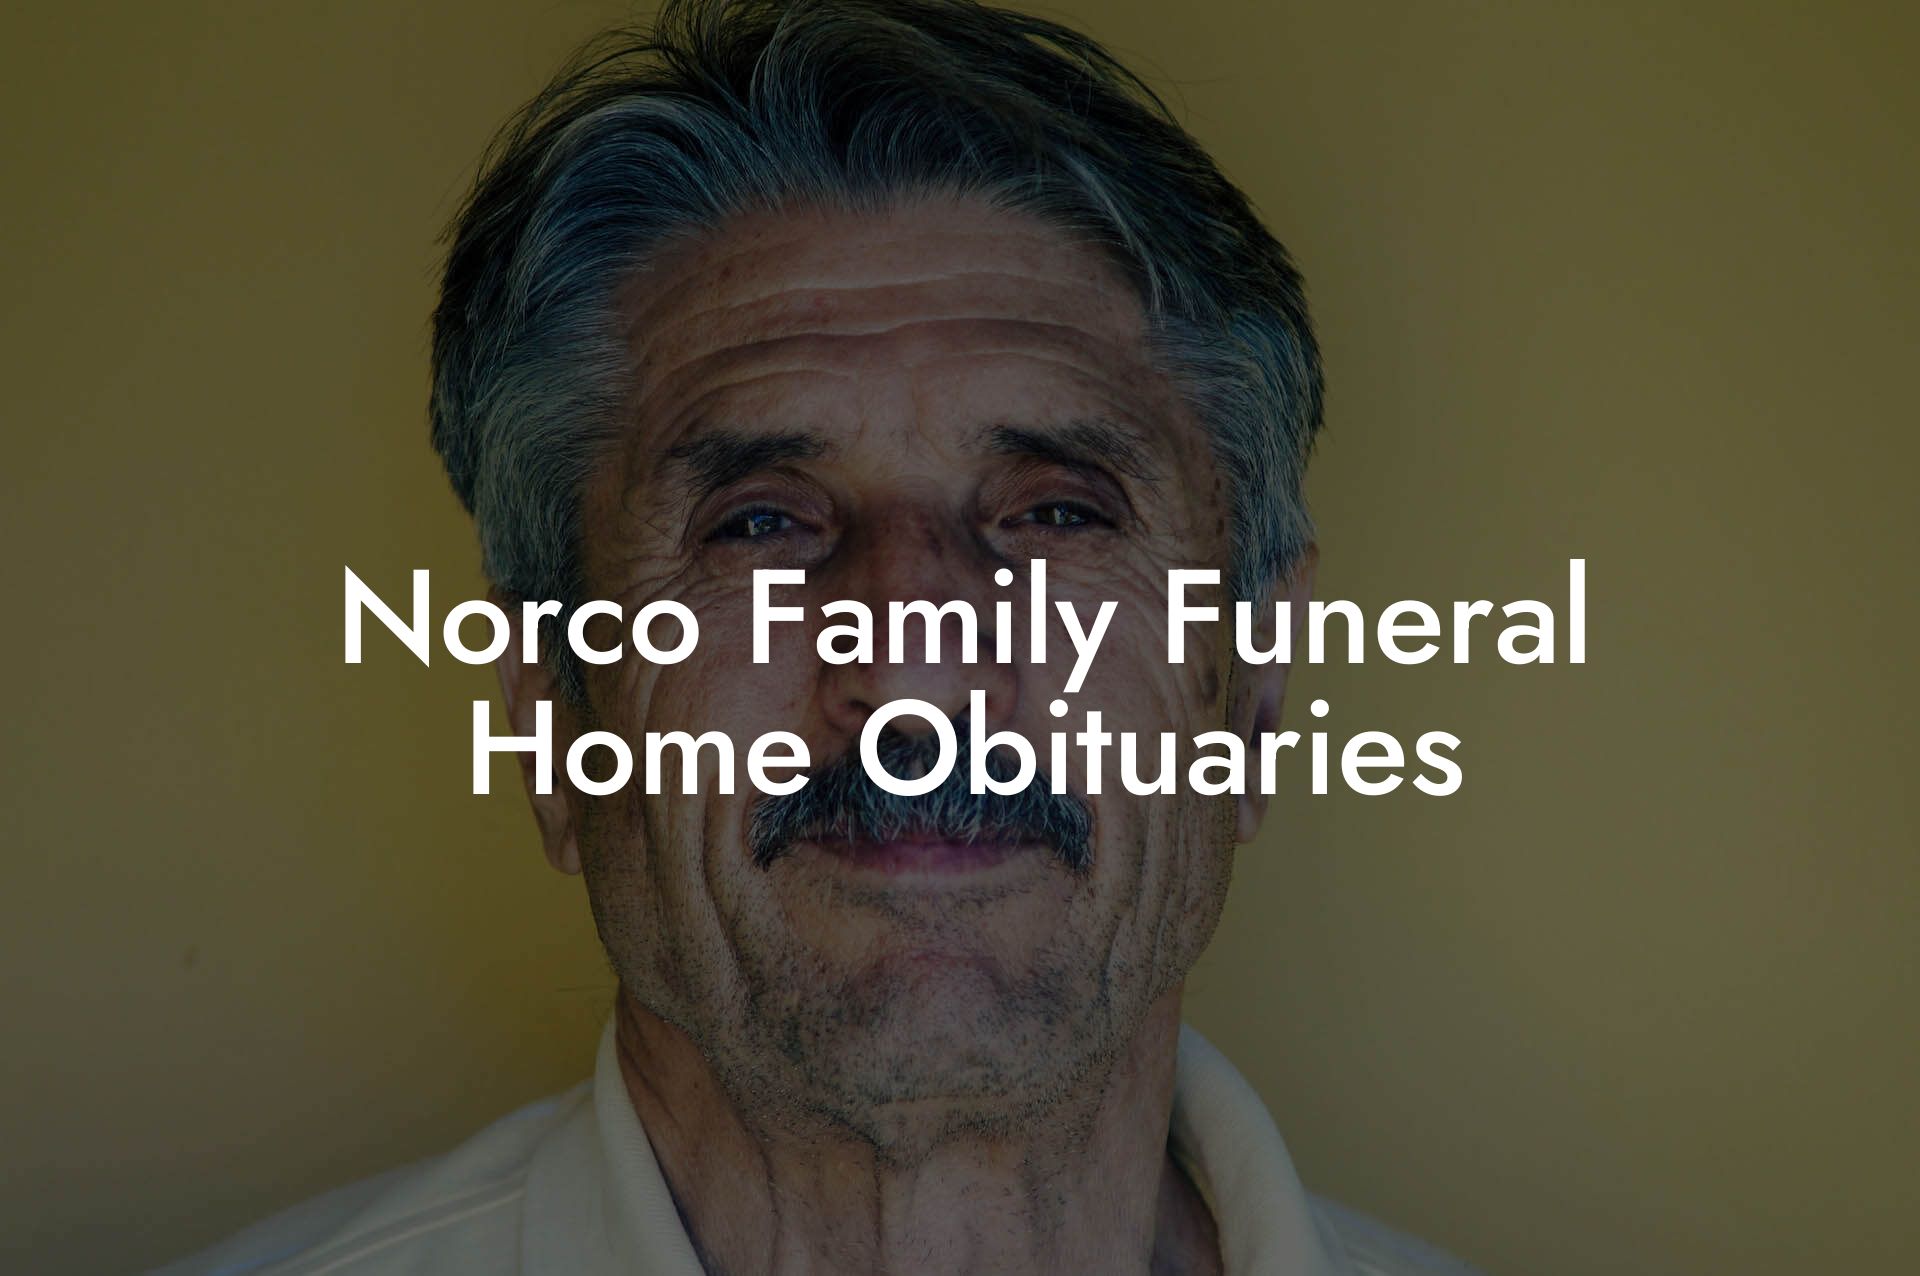 Norco Family Funeral Home Obituaries